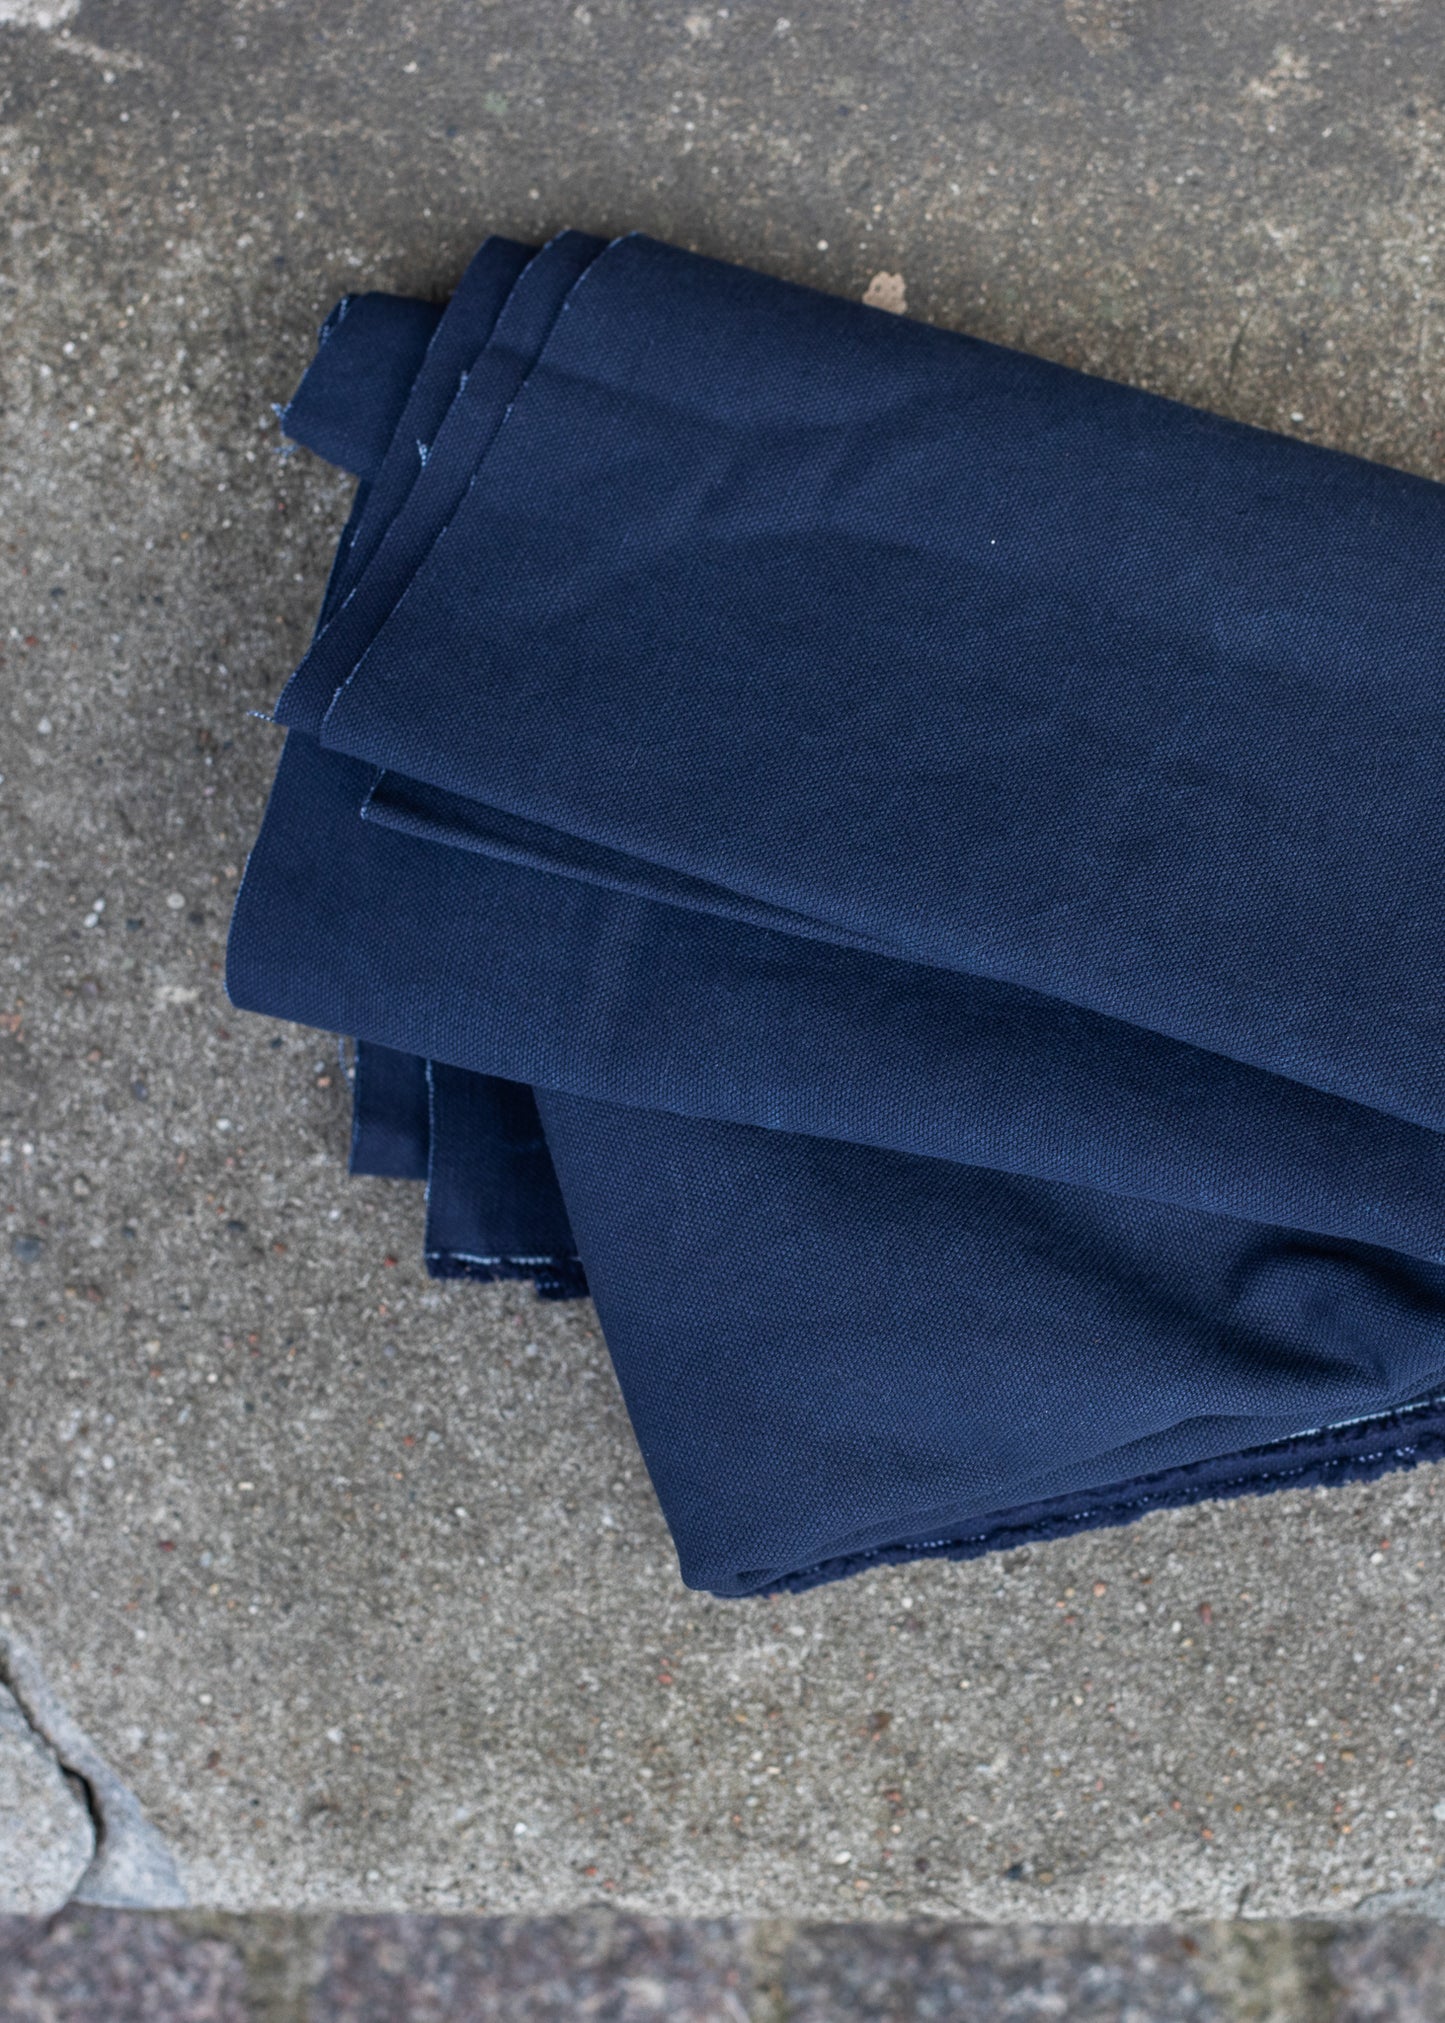 mind the maker | heavy washed canvas | navy